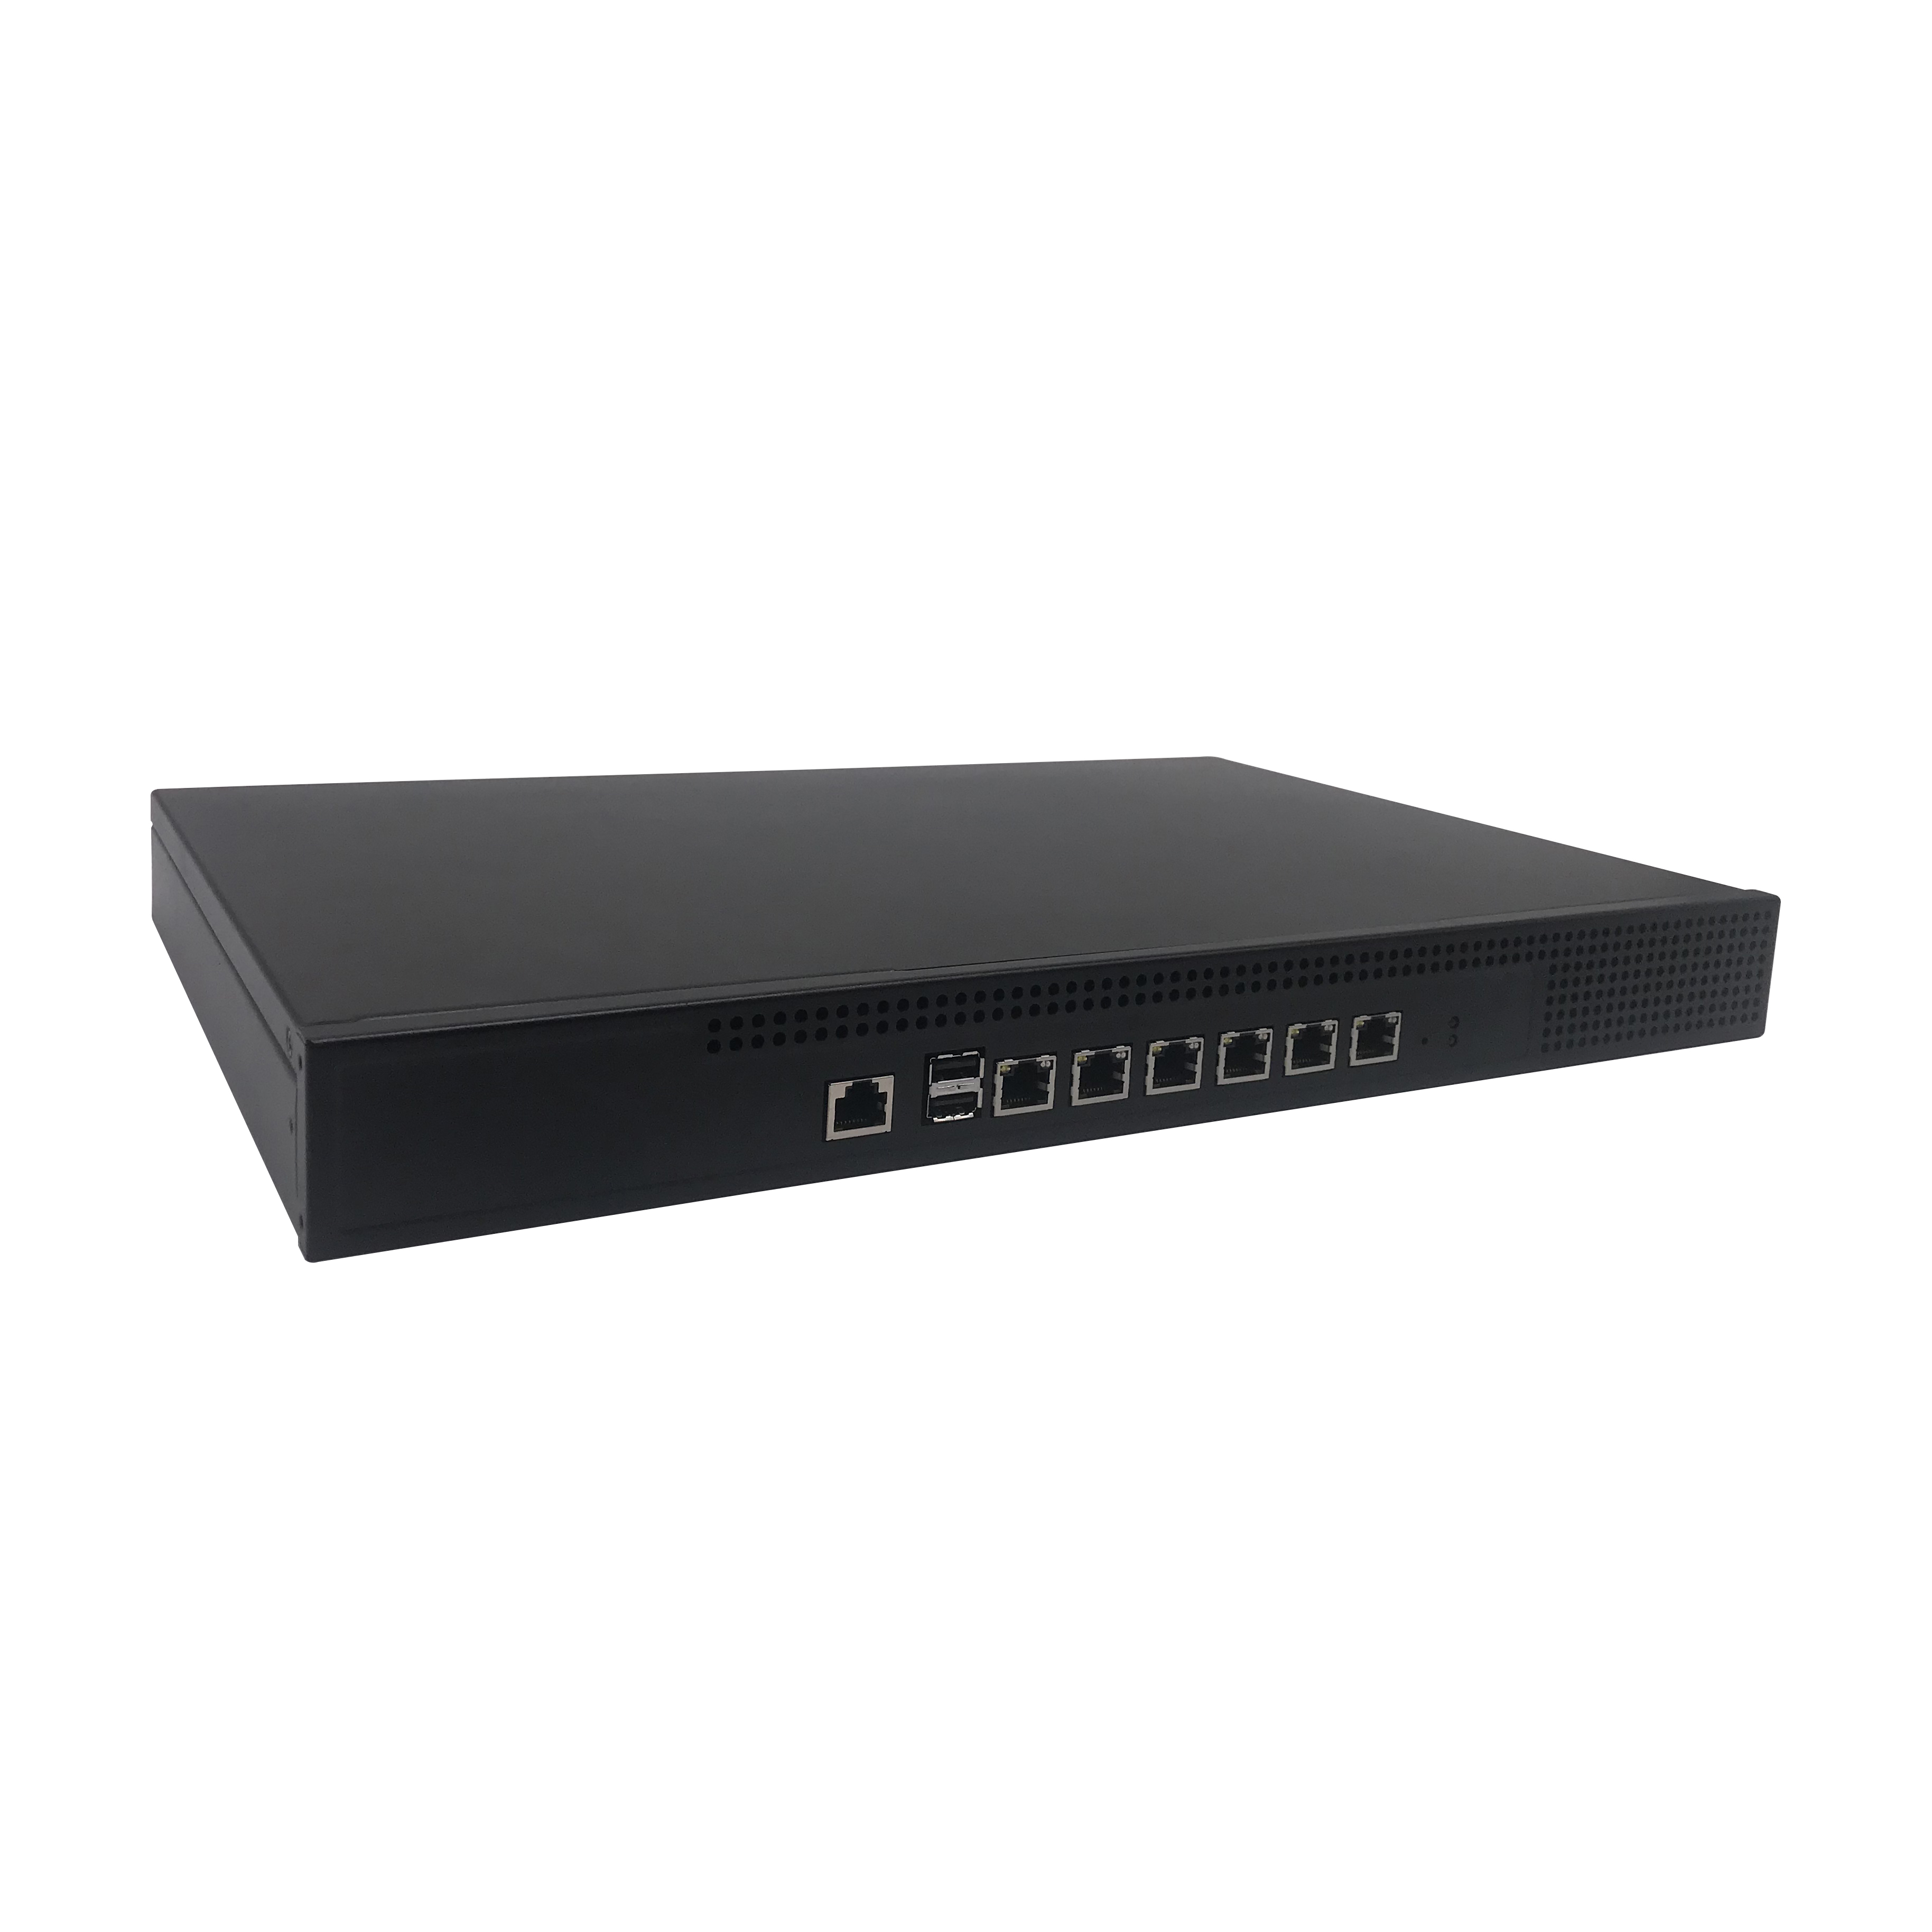 the newest Intel H67/B75 1U rackmount 6 GbE LAN best computer network security appliance hardware VPN network monitoring system